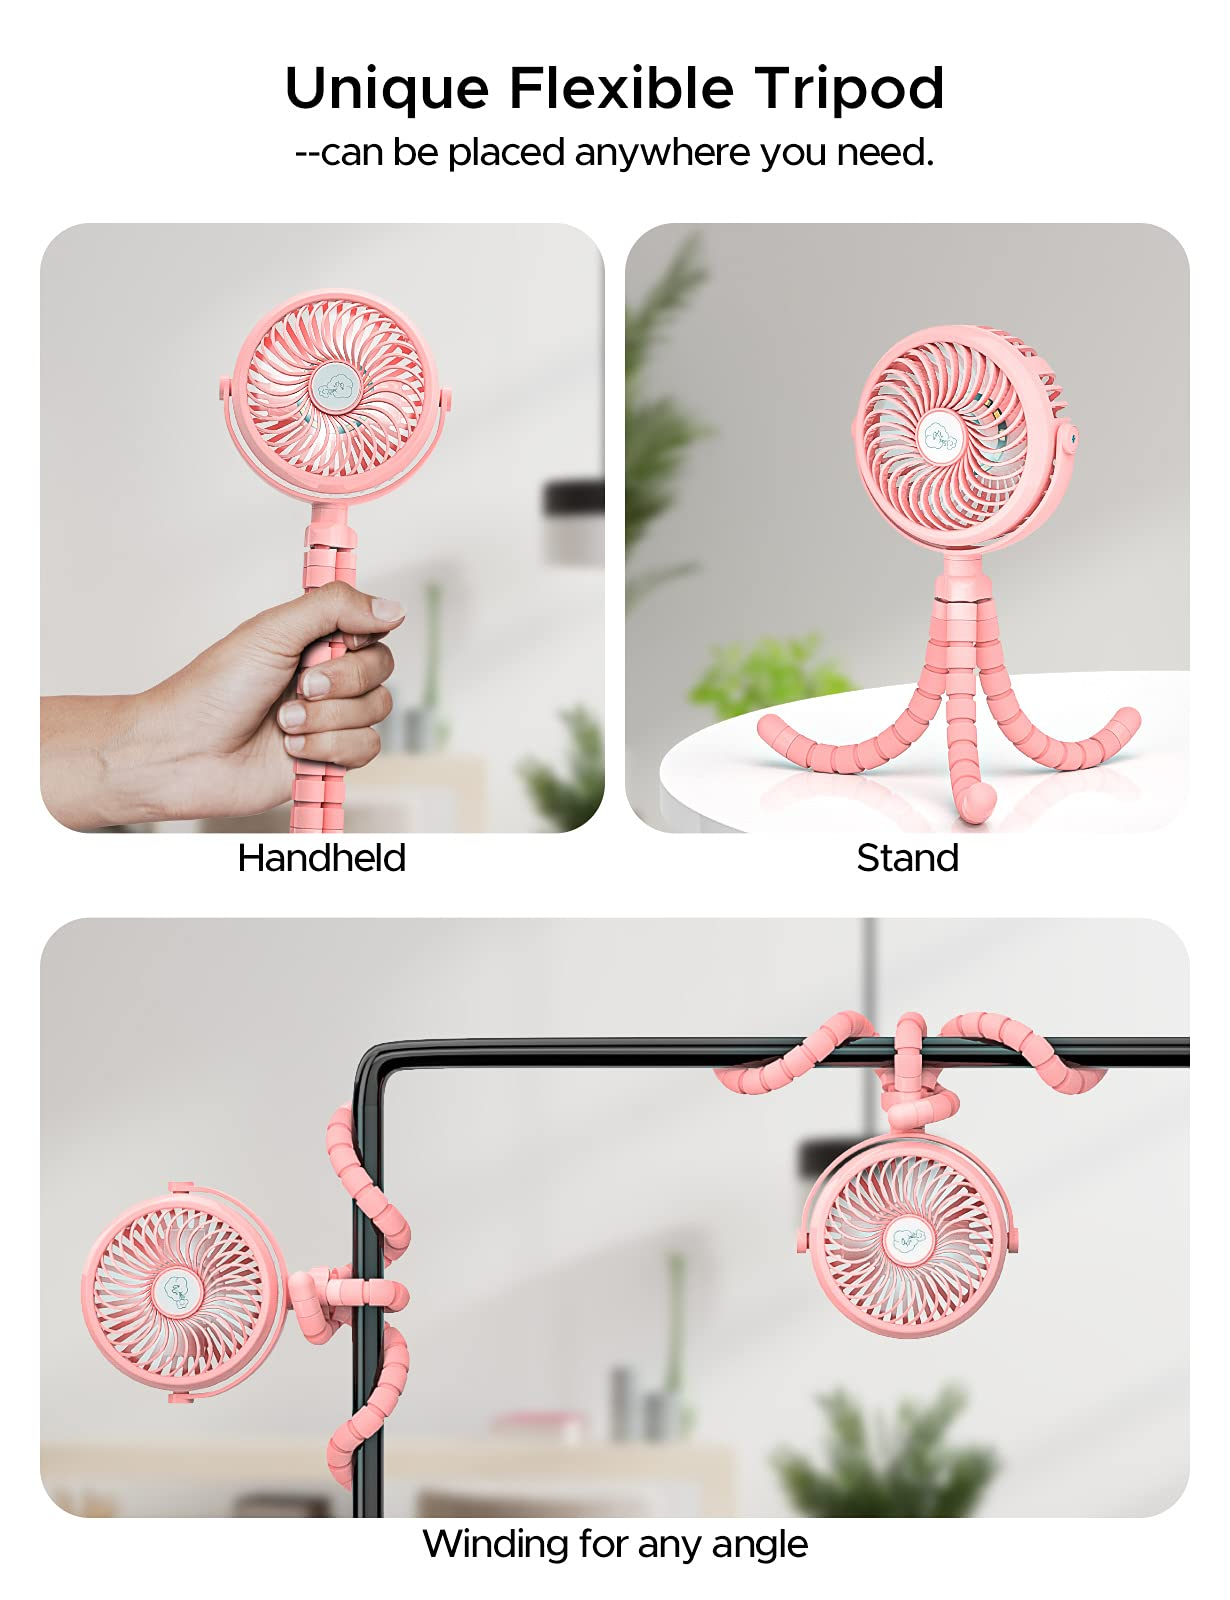 Rechargeable Battery Operated Small Fan, Portable Hand Held Personal Fan for Stand Desktop Bedroom or Clip On Baby Stroller Camping Tent with Flexible & Windable Tripod, 3-Speed & LED Light - image 5 of 7